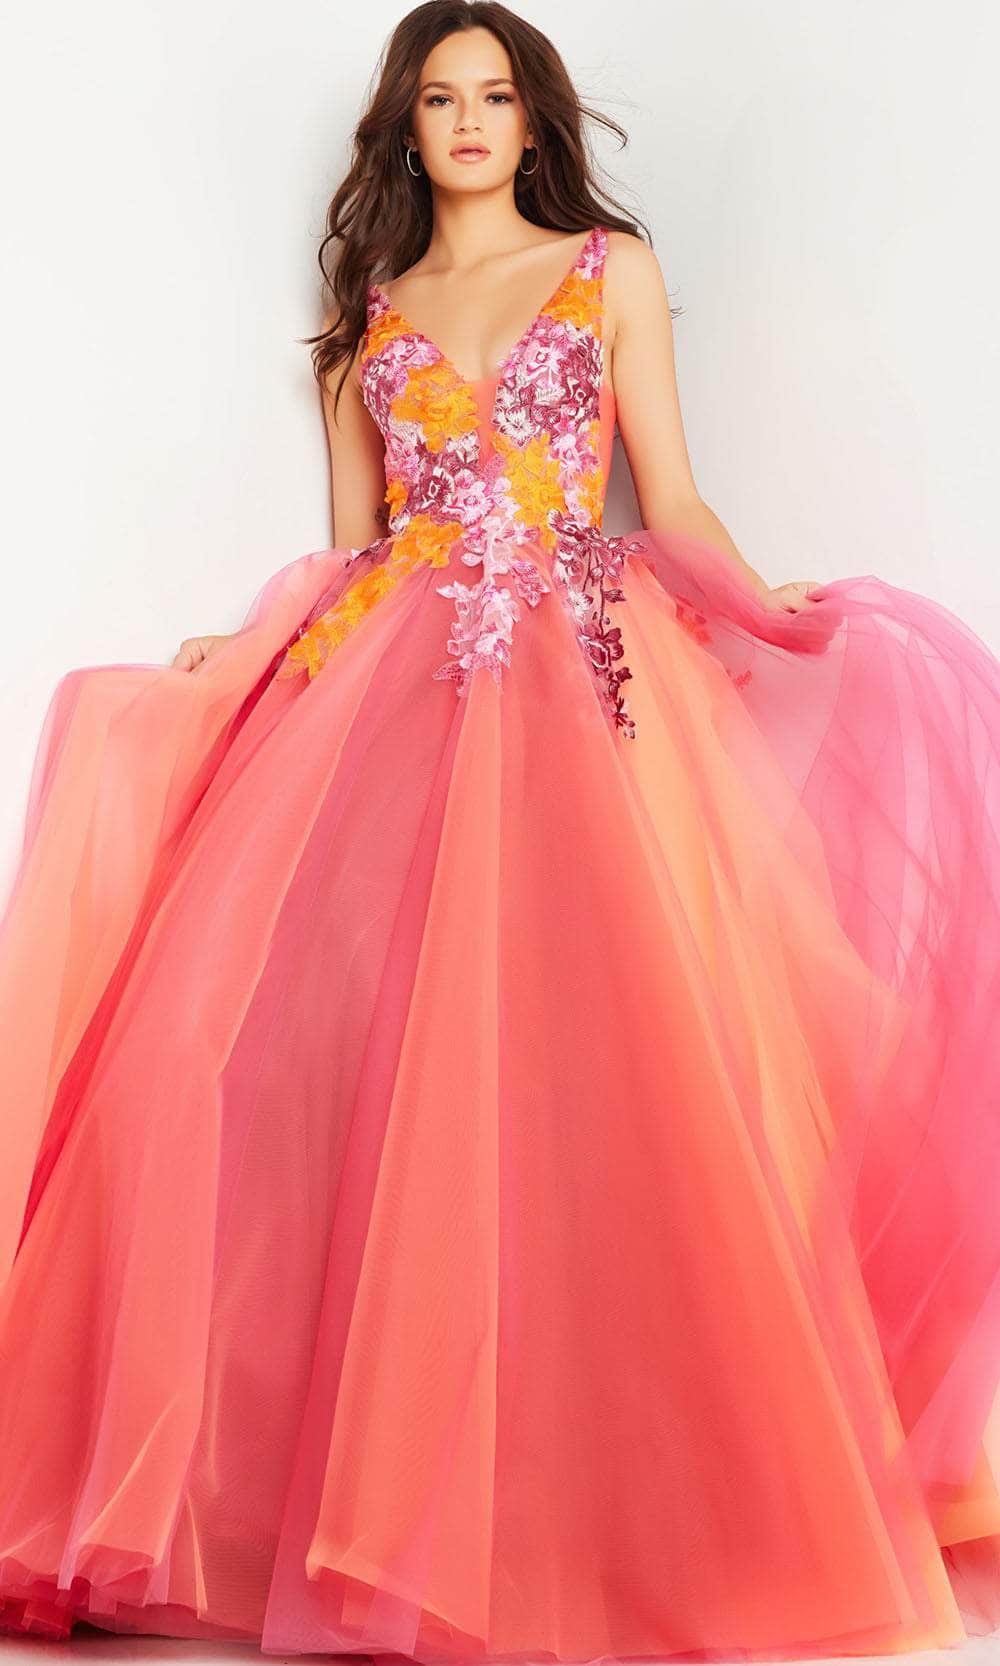 Image of Jovani 25800 - Floral Embroidered Sleeveless Ballgown